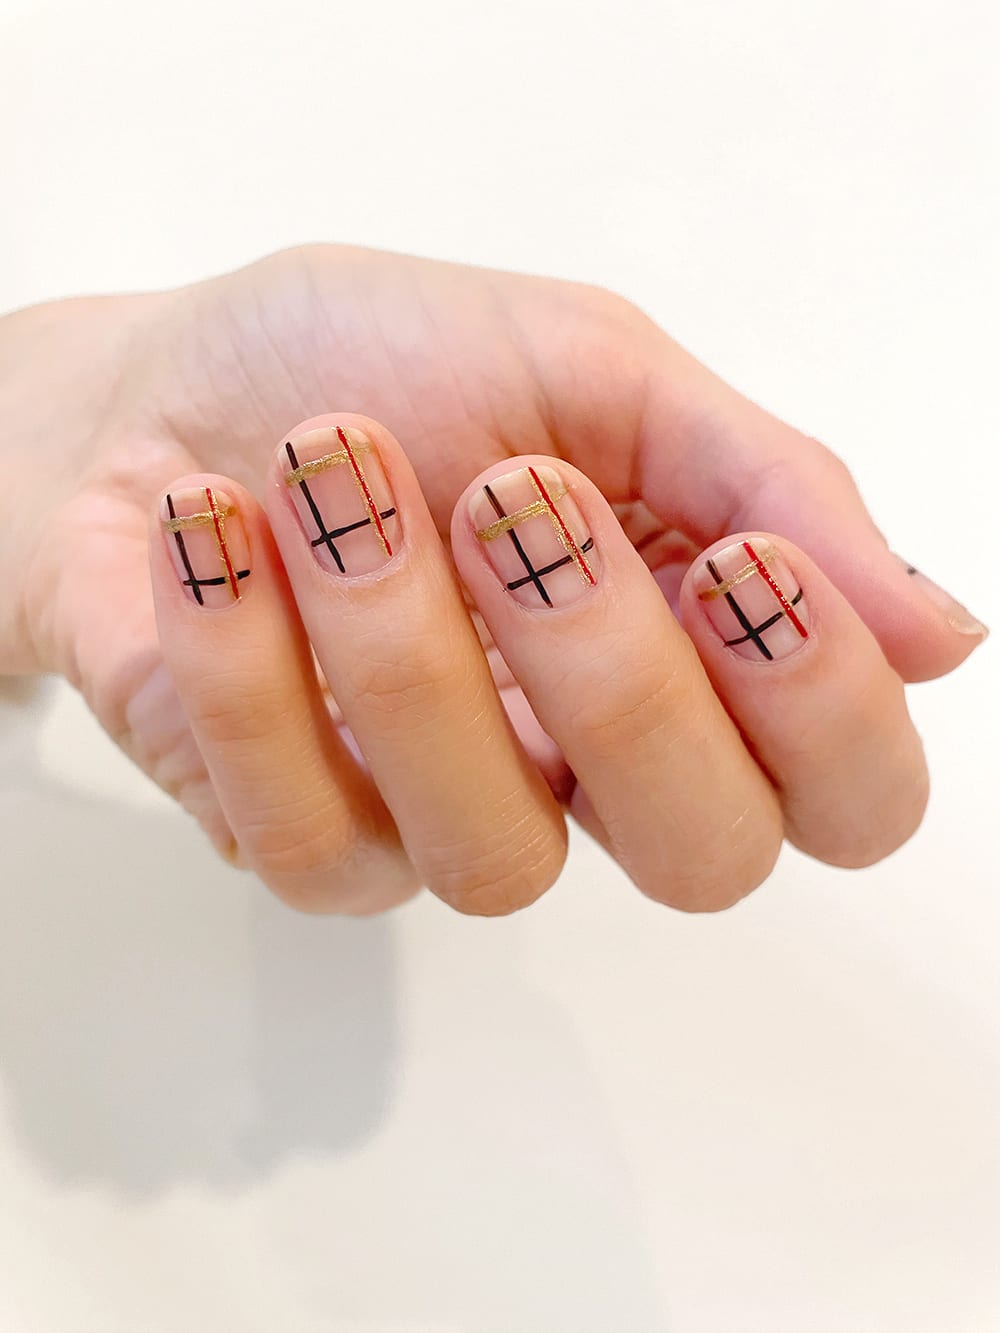 step 7 of plaid nail tutorial adding red lines